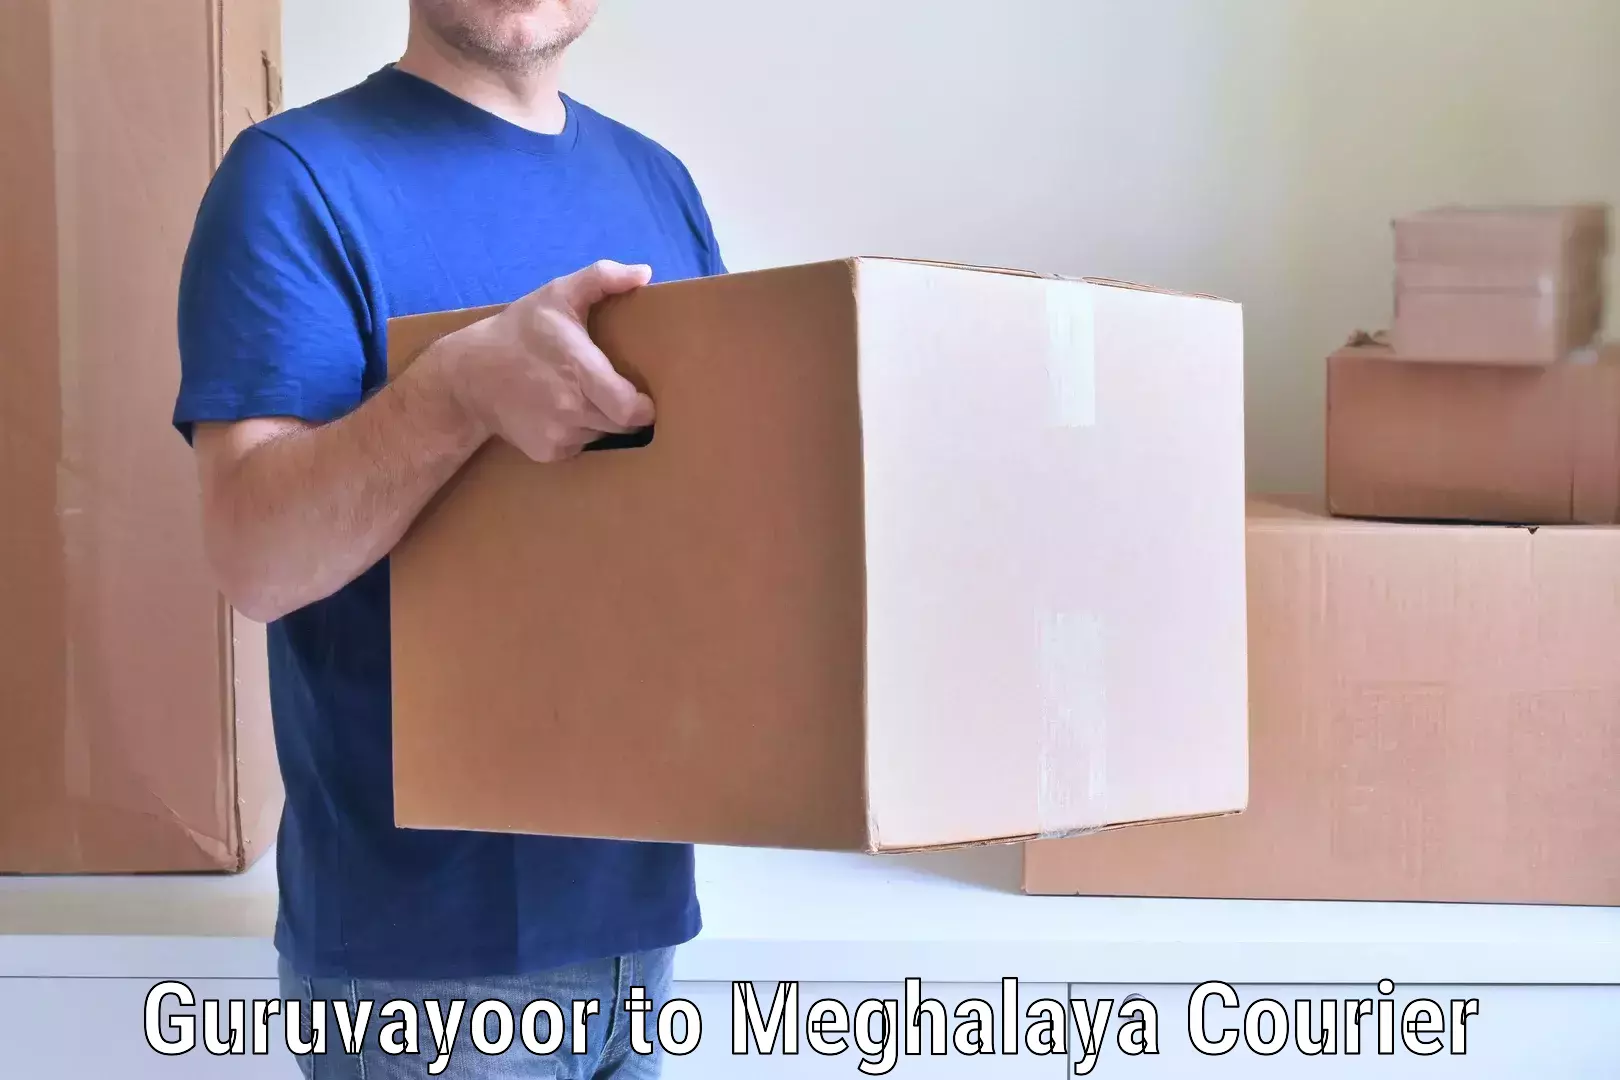 Efficient packing and moving Guruvayoor to Tura